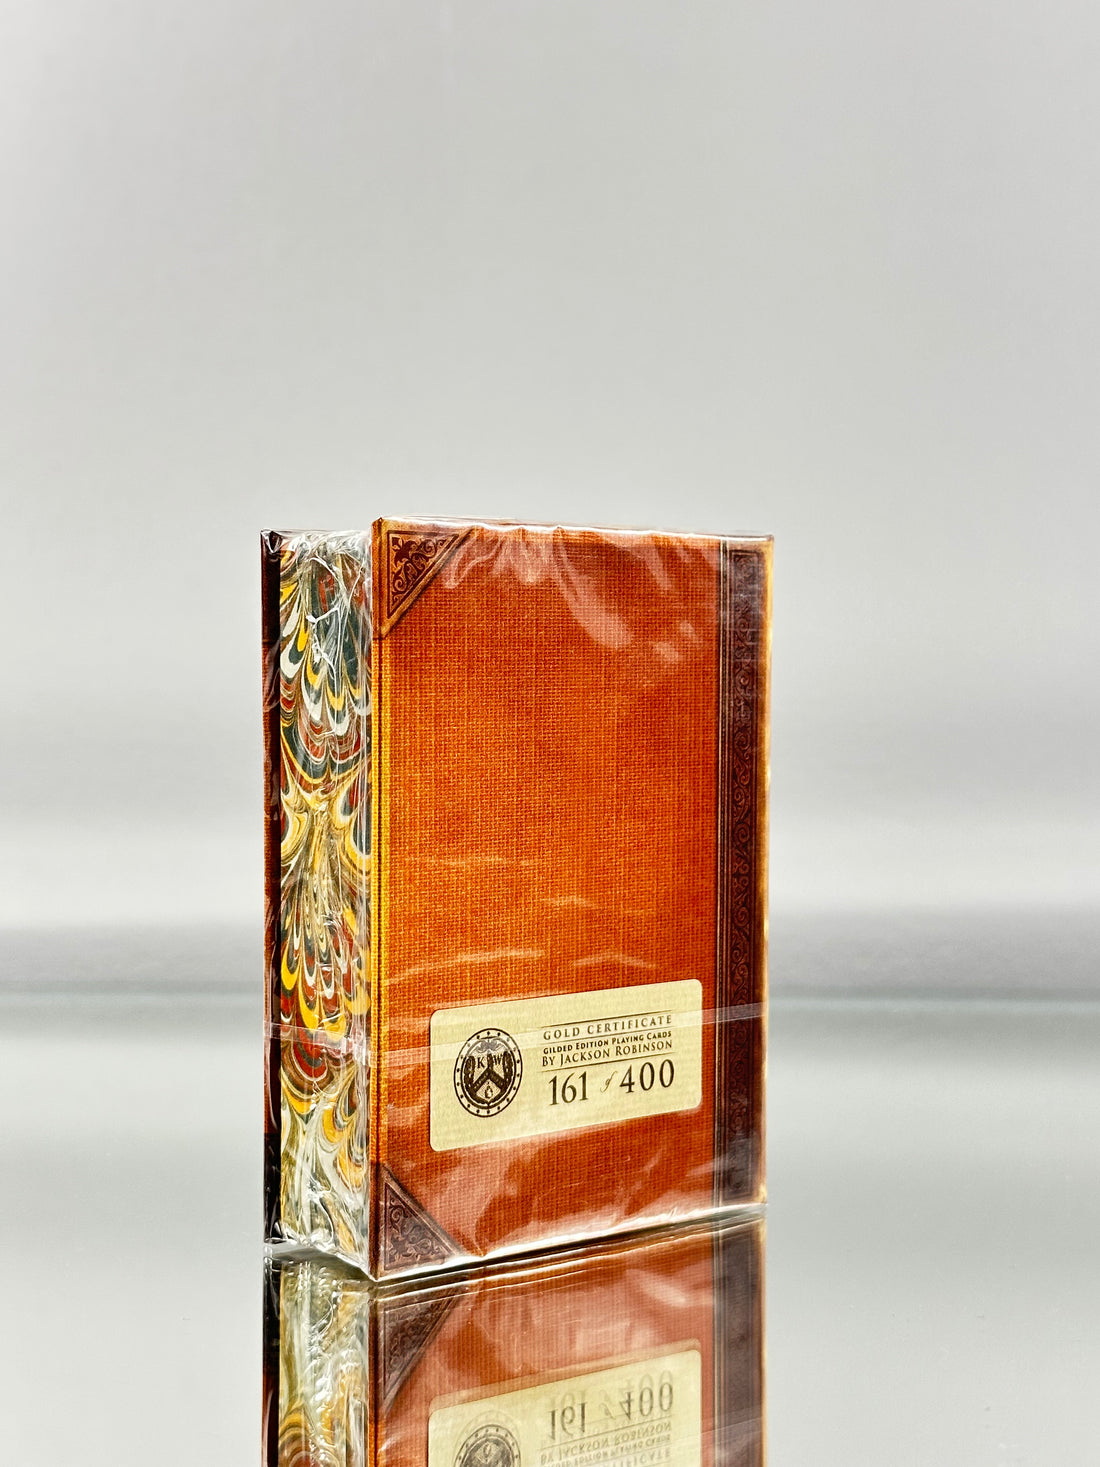 Kings Wild Project Gold Certificate Foiled Gilded Playing Cards Book Box